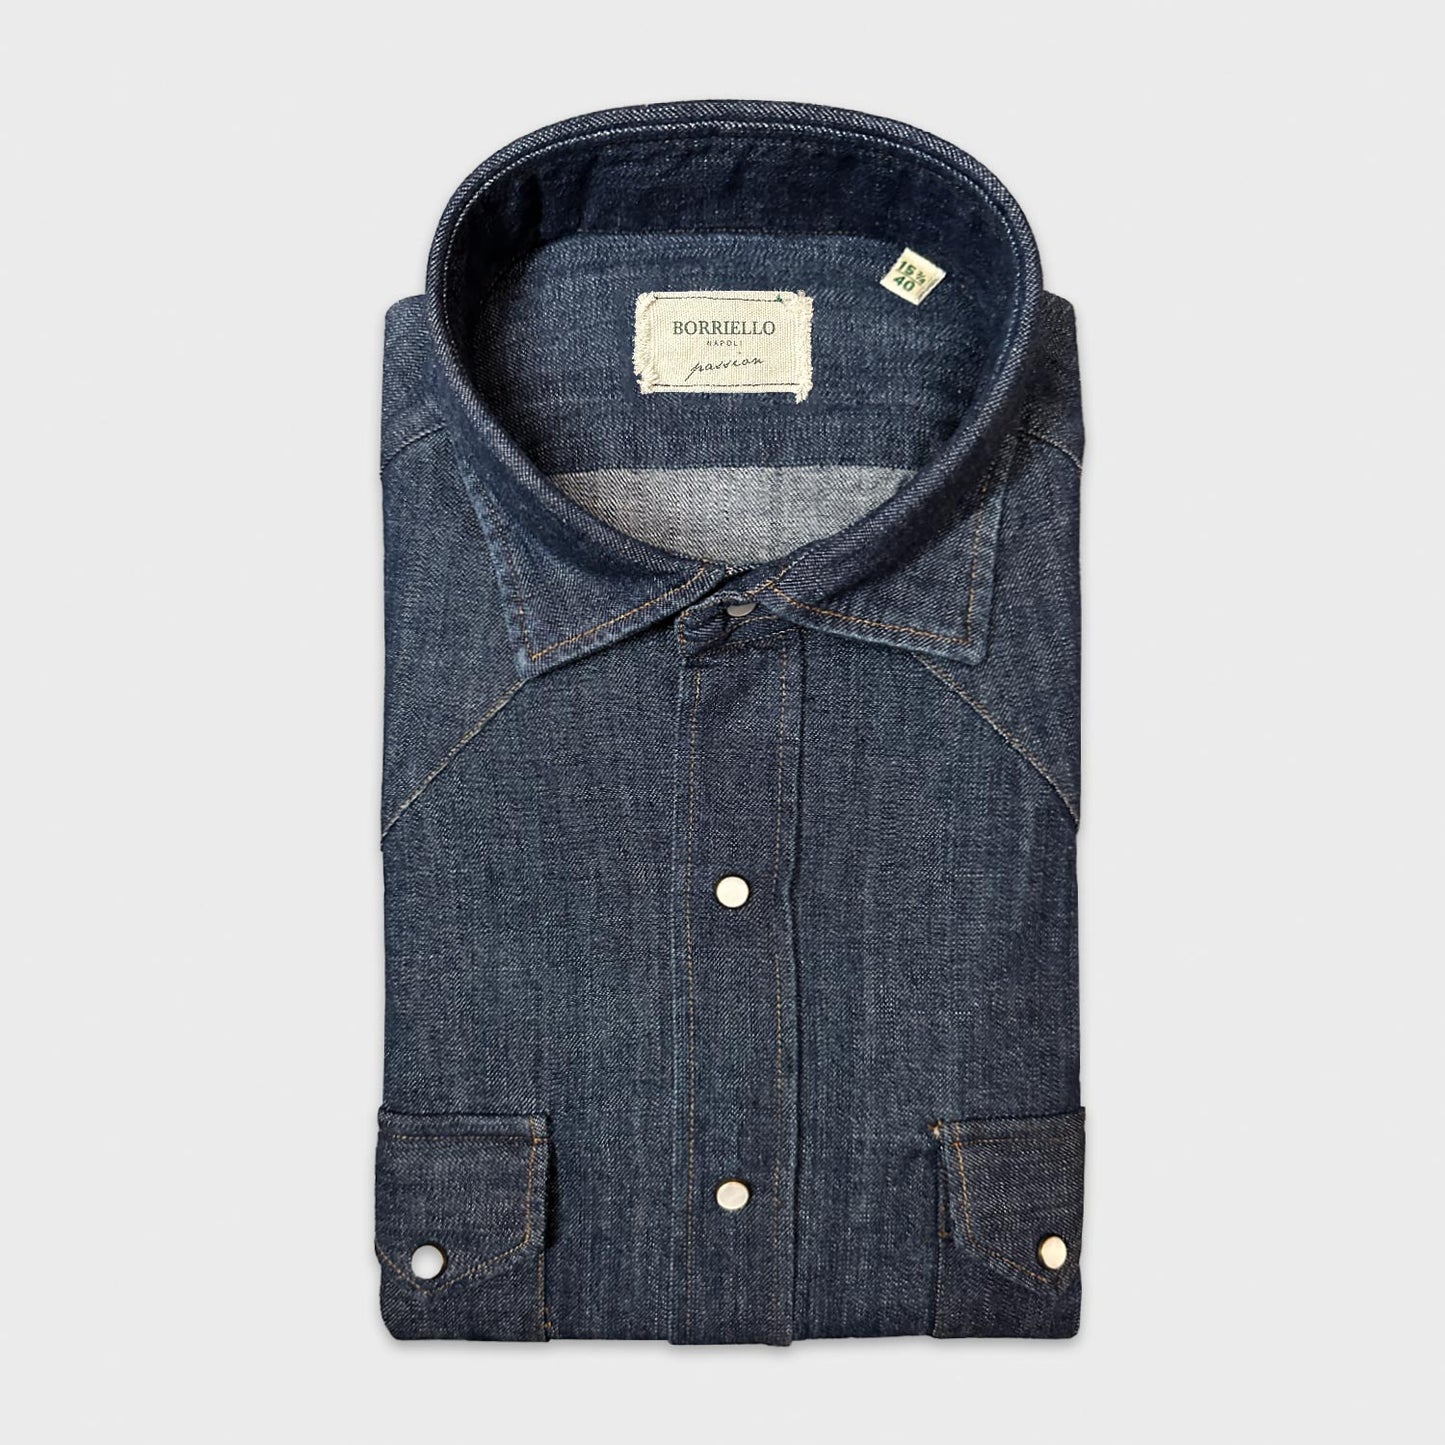 Indigo Blue Western Denim Shirt Borriello Napoli. Western shirt made in Italy by Borriello Napoli, made with soft denim fabric ideal for a comfortable and resistant taxana shirts, shoulder patches and pearly snap buttons, dark indigo blue color